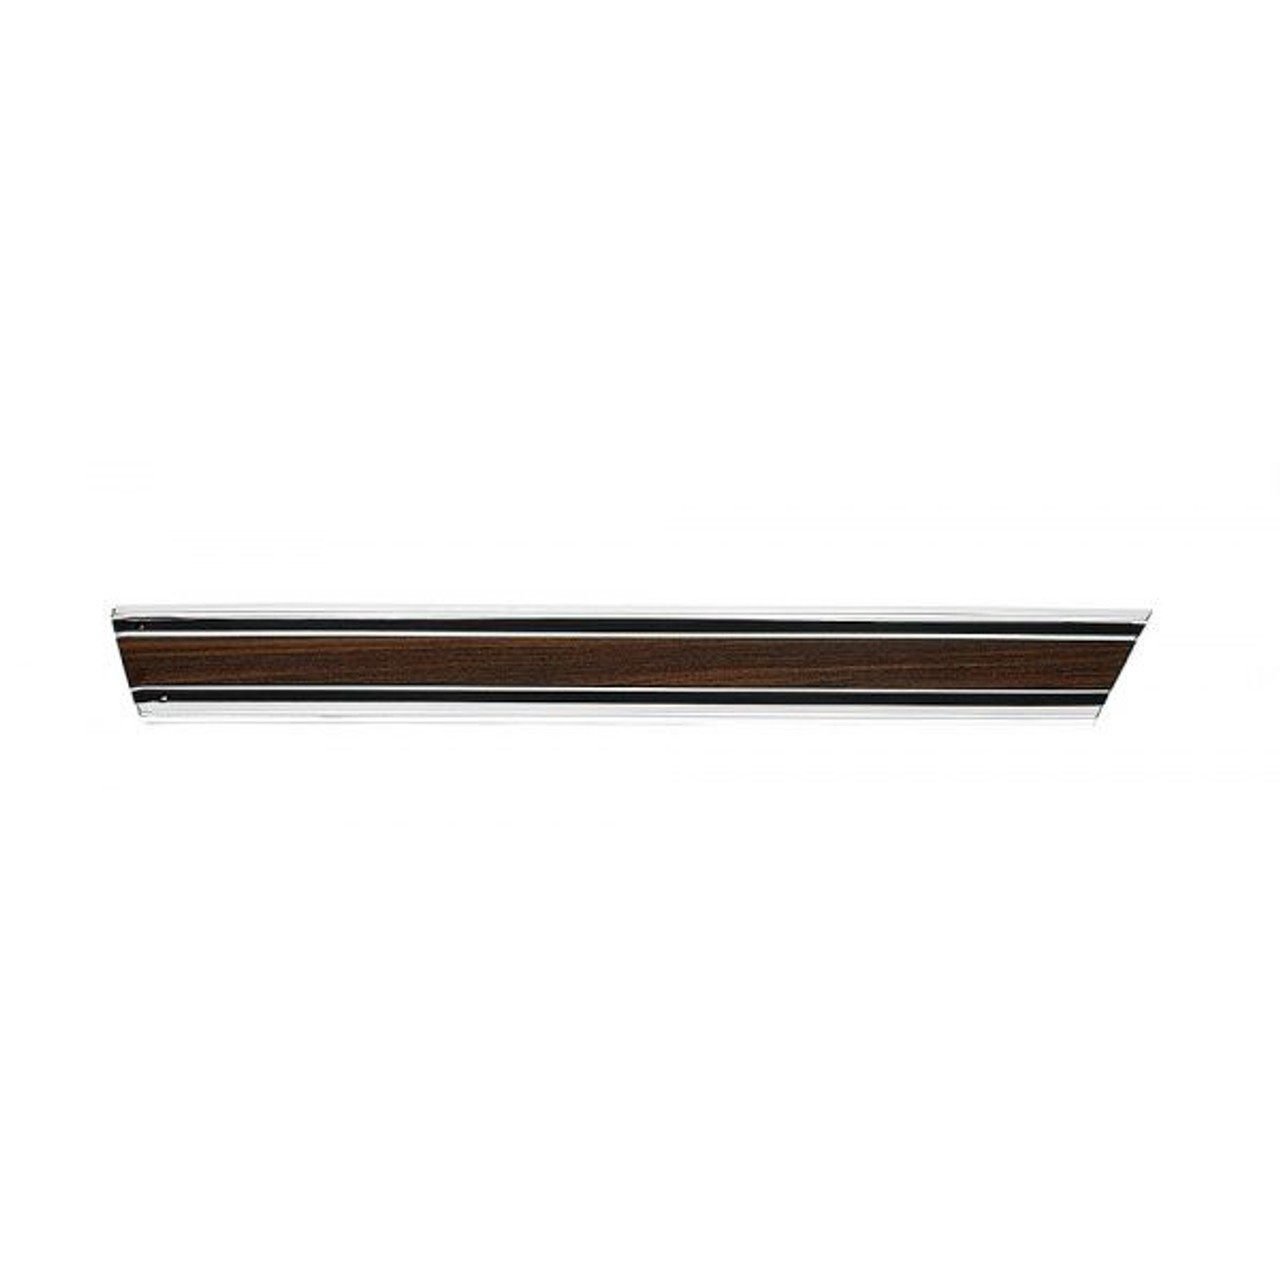 1969-72 Chevy/GMC Truck Bedside Lower Molding Rear of Wheel. Shortbed, Woodgrain Insert (includes clips) LH, ea.